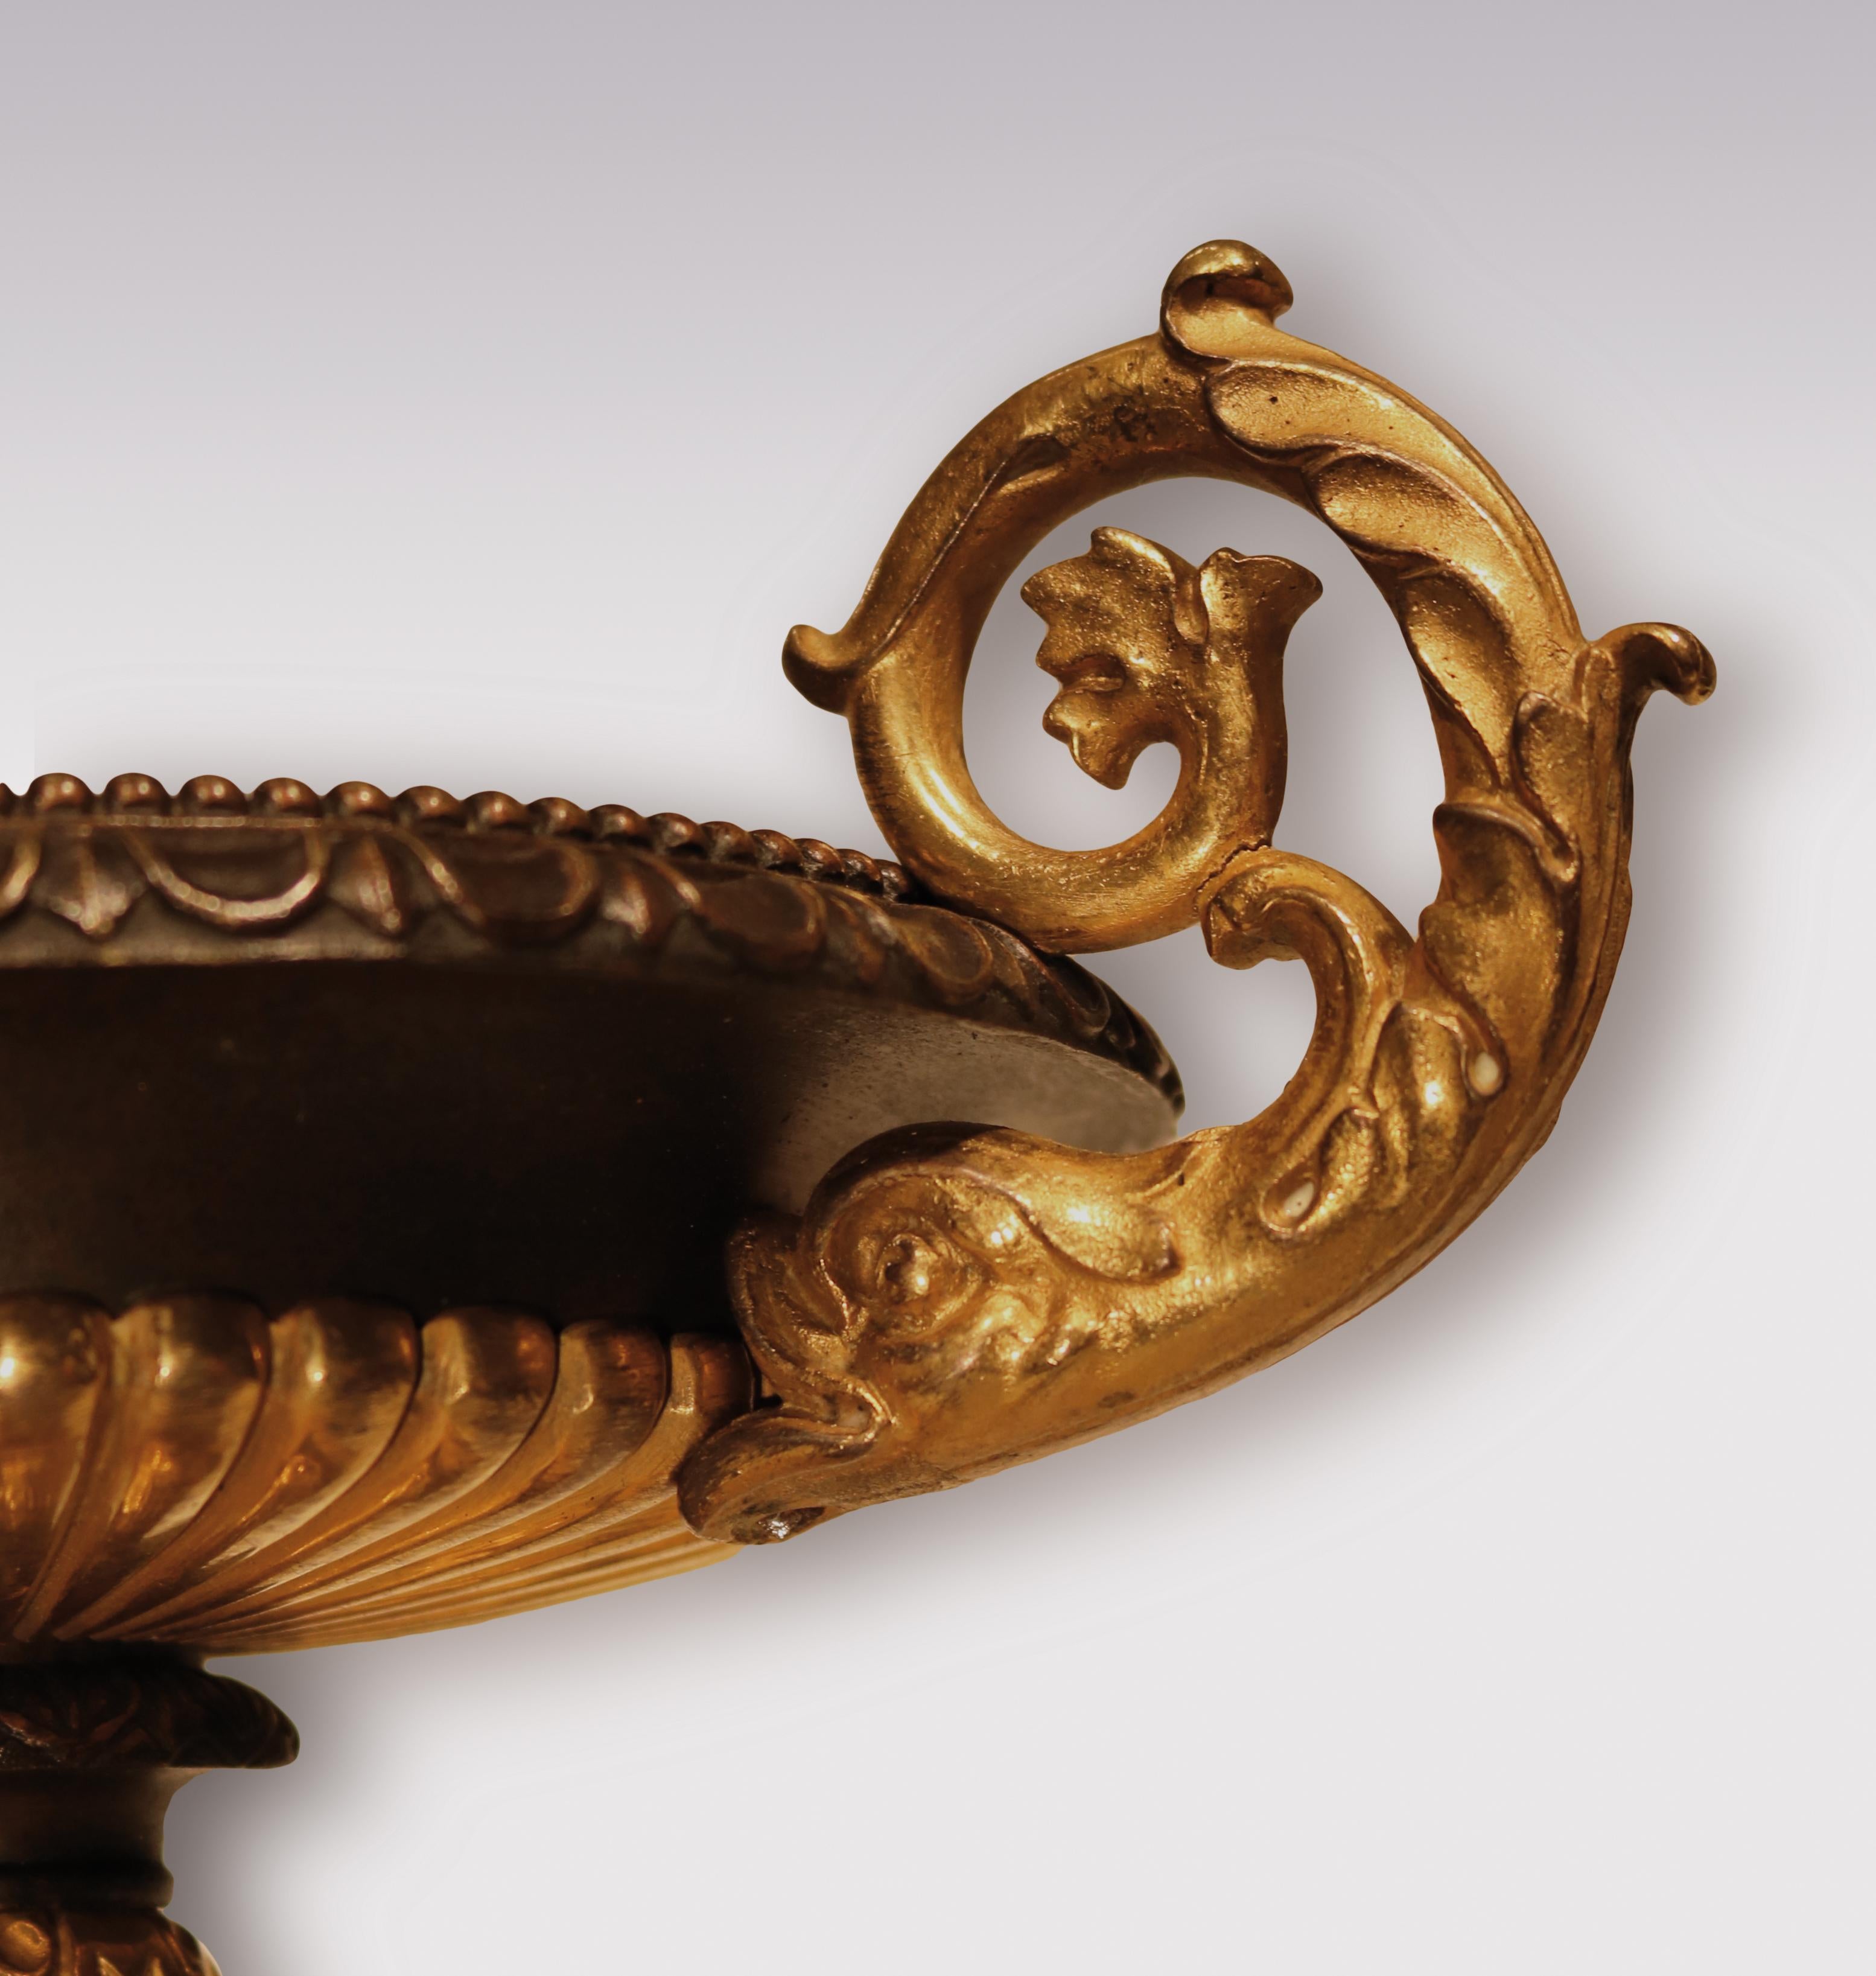 A pair of early 19th century bronze and ormolu tazzas having beaded and leaf decorated rims and unusual dolphin carrying handles, supported on Sienna marble bases.